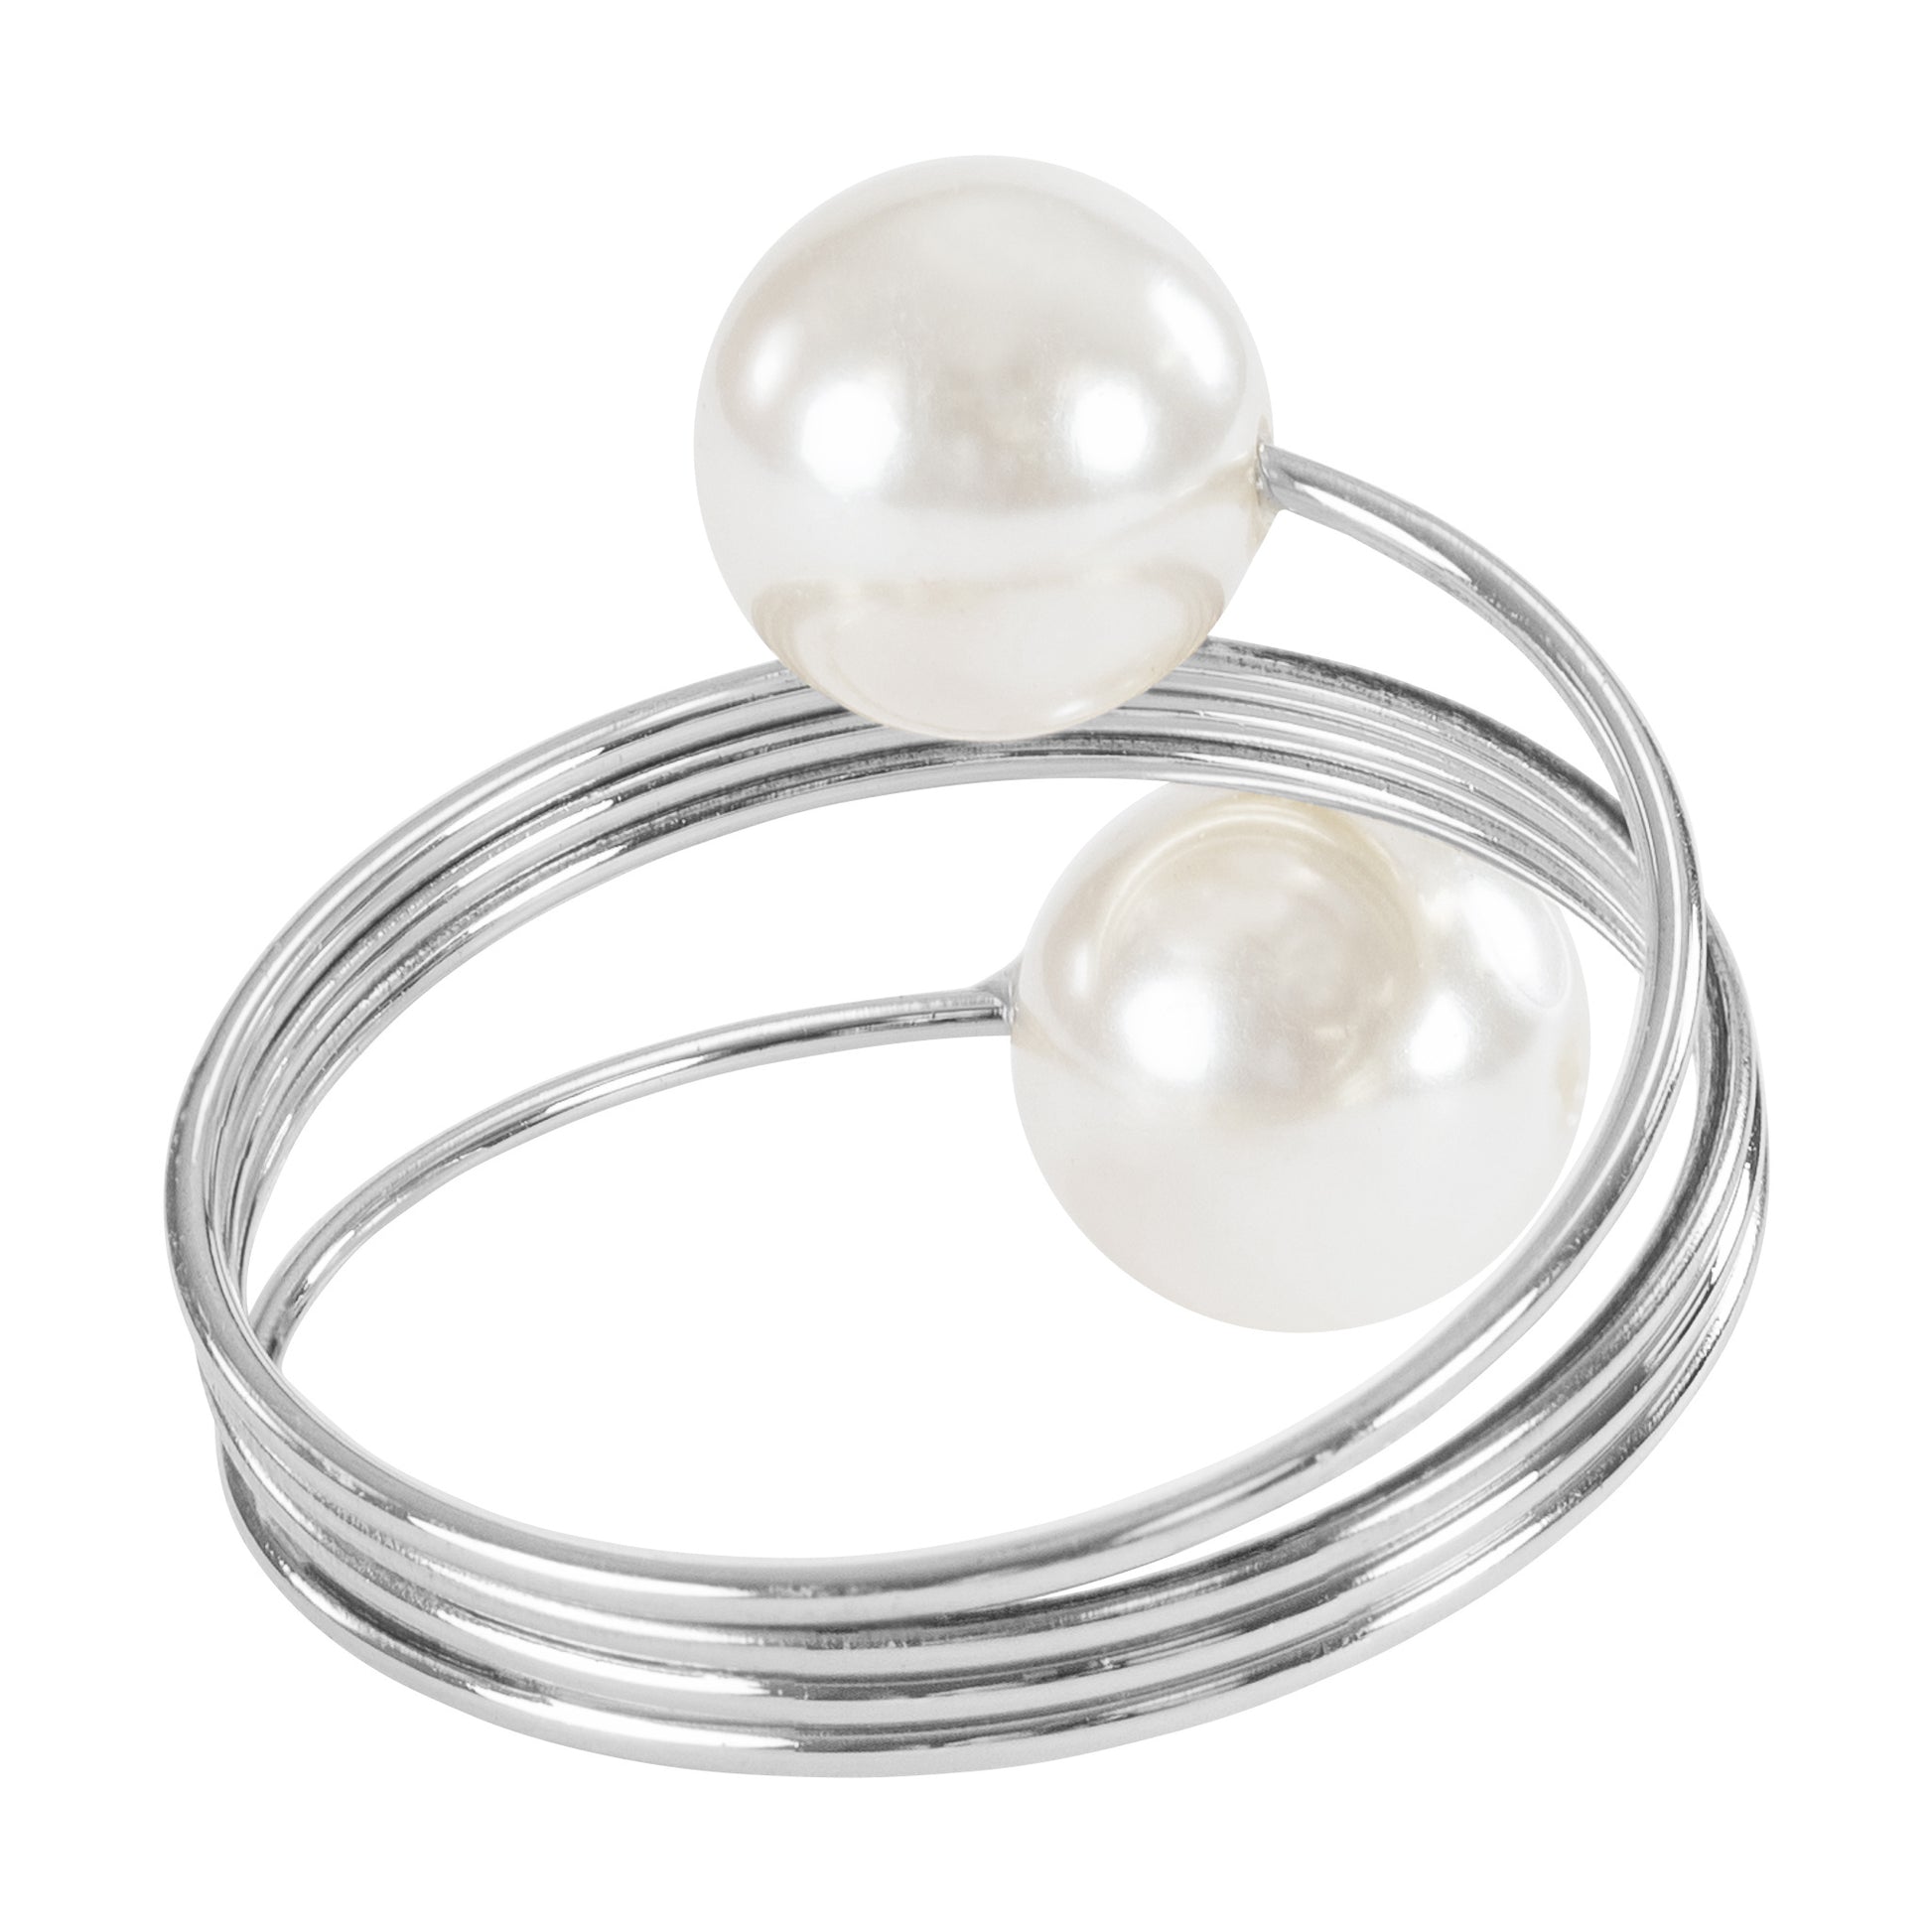 Spiral Faux Pearl Napkin Ring - Silver